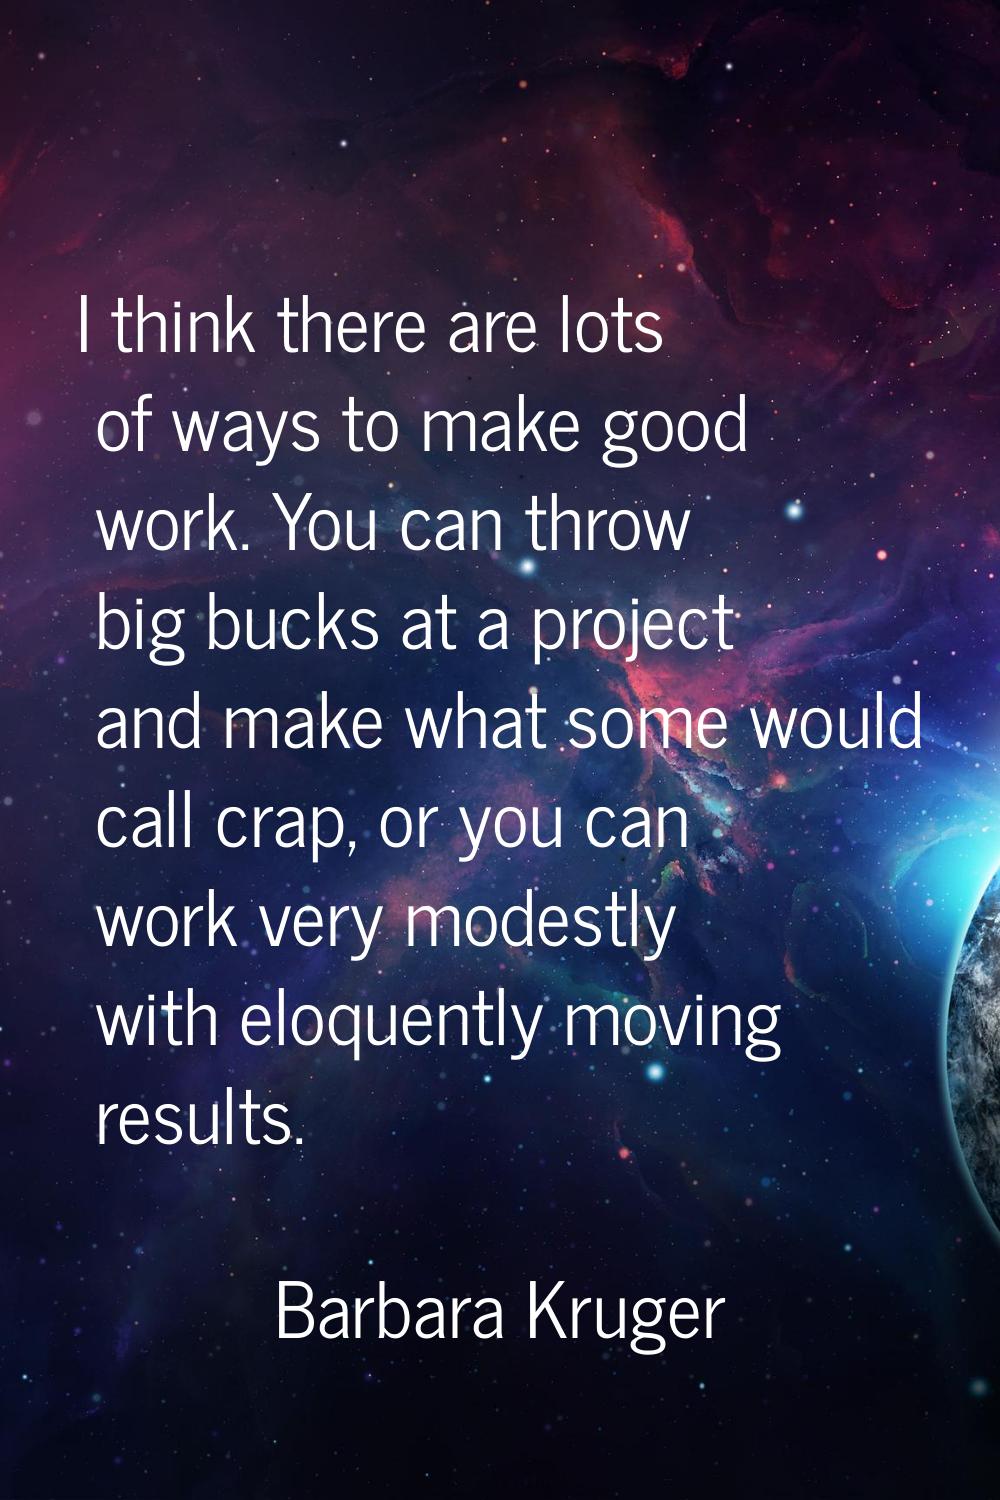 I think there are lots of ways to make good work. You can throw big bucks at a project and make wha